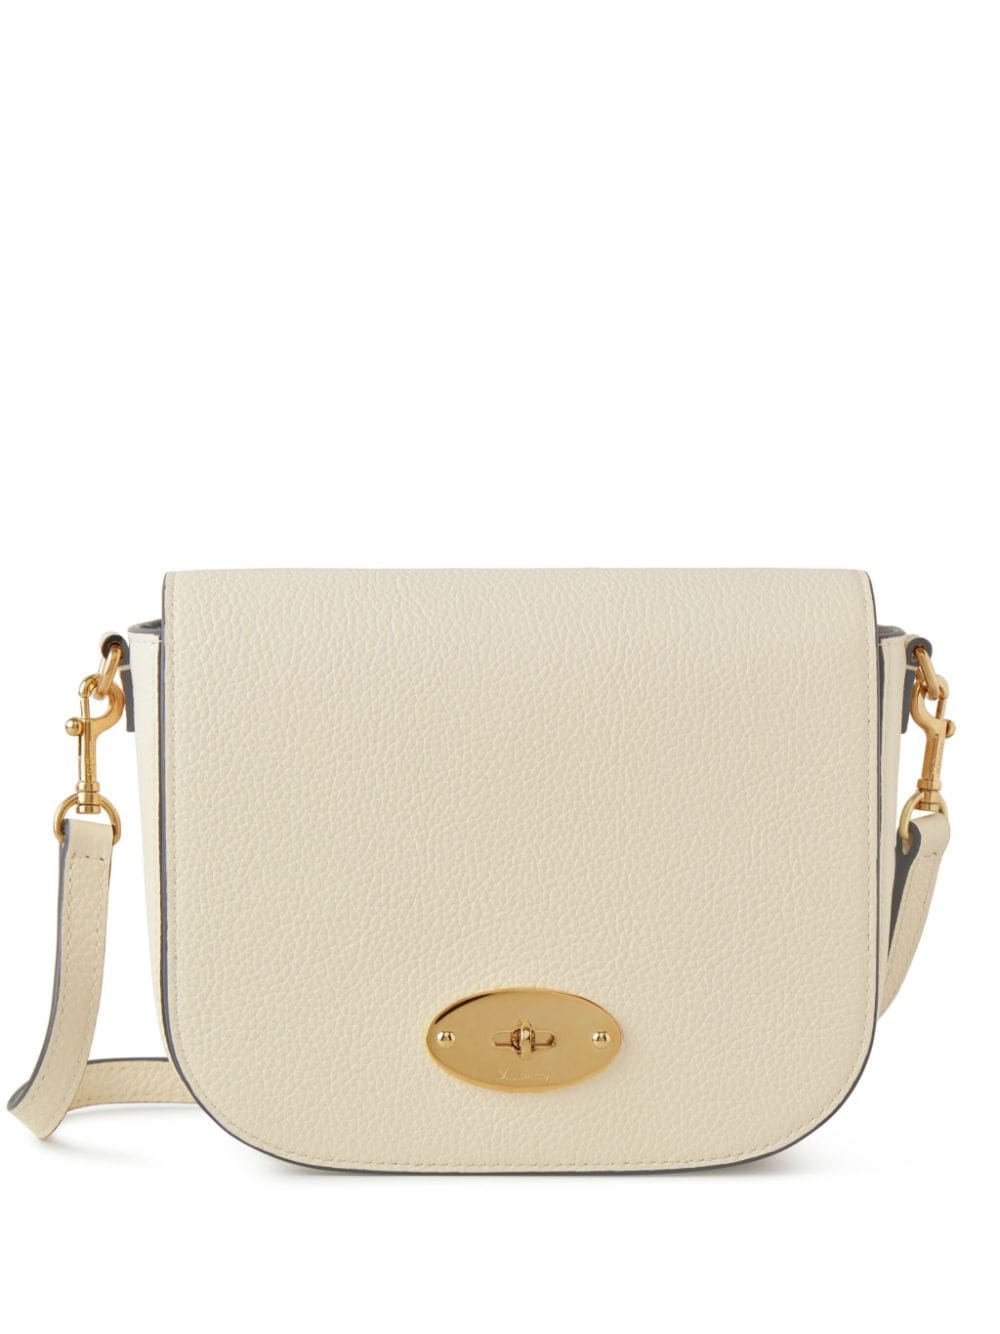 Mulberry Small Darley Leather Satchel In Neutral